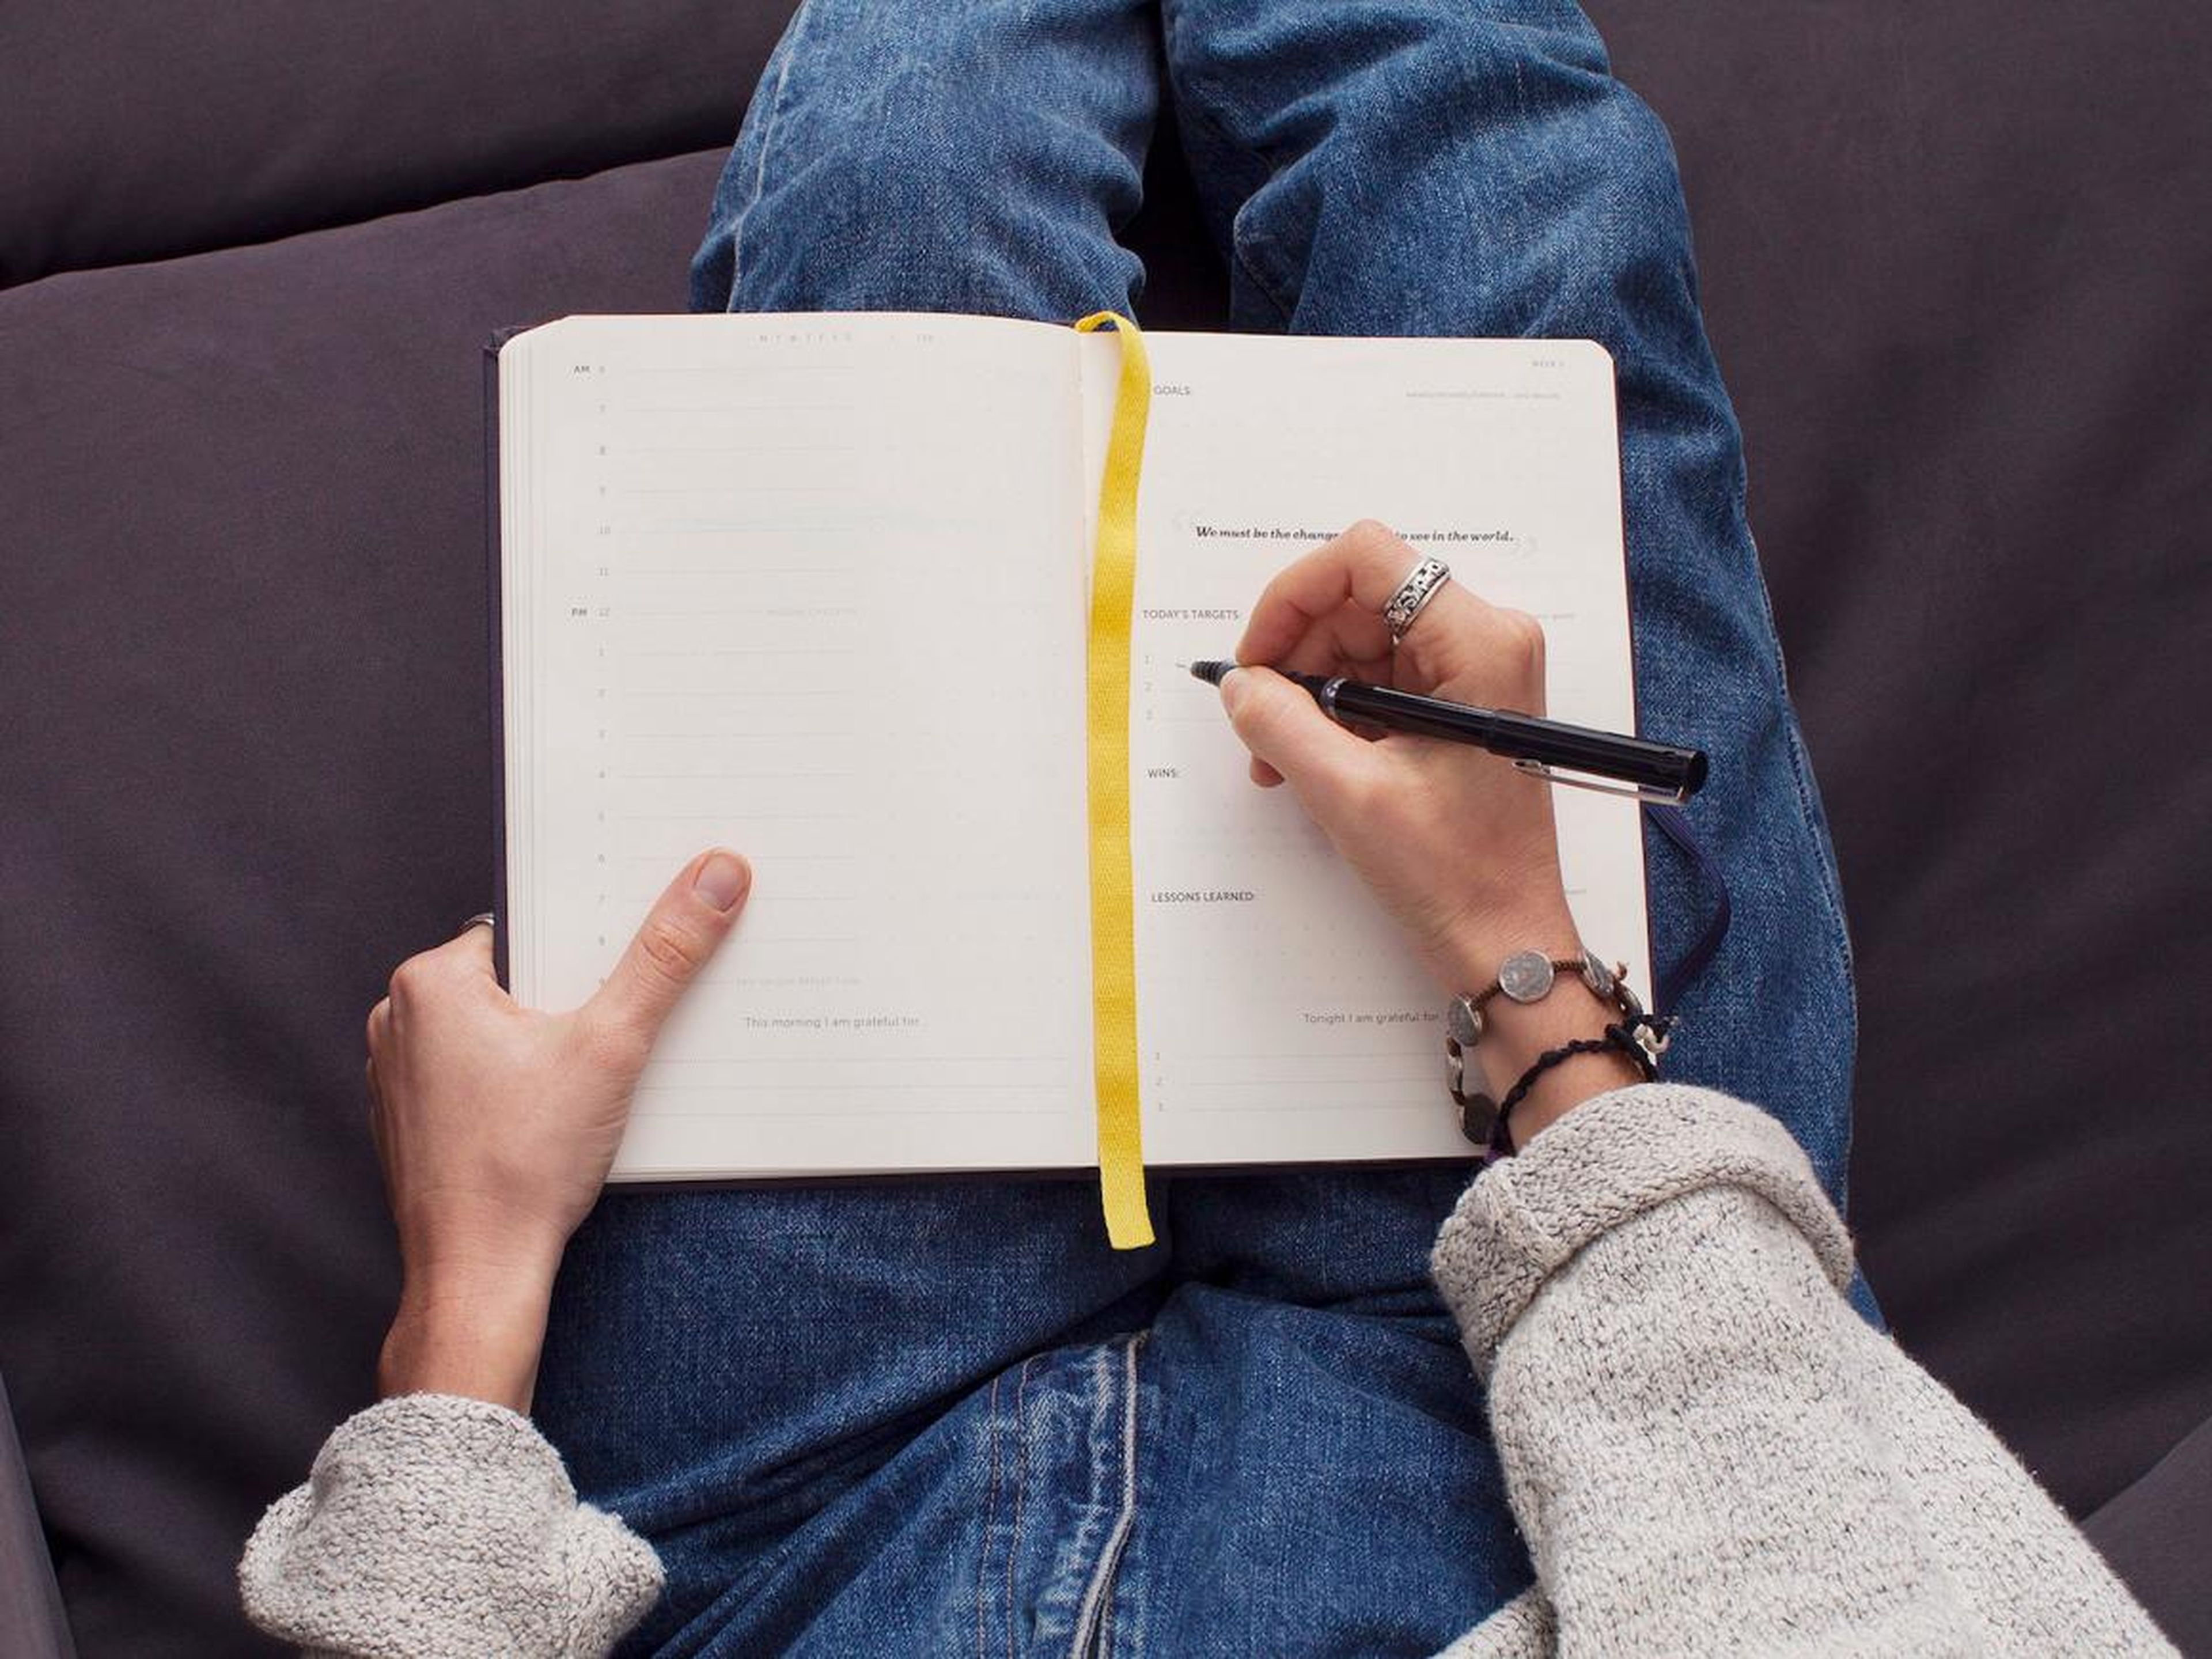 Write out everything amazing you did in the past month